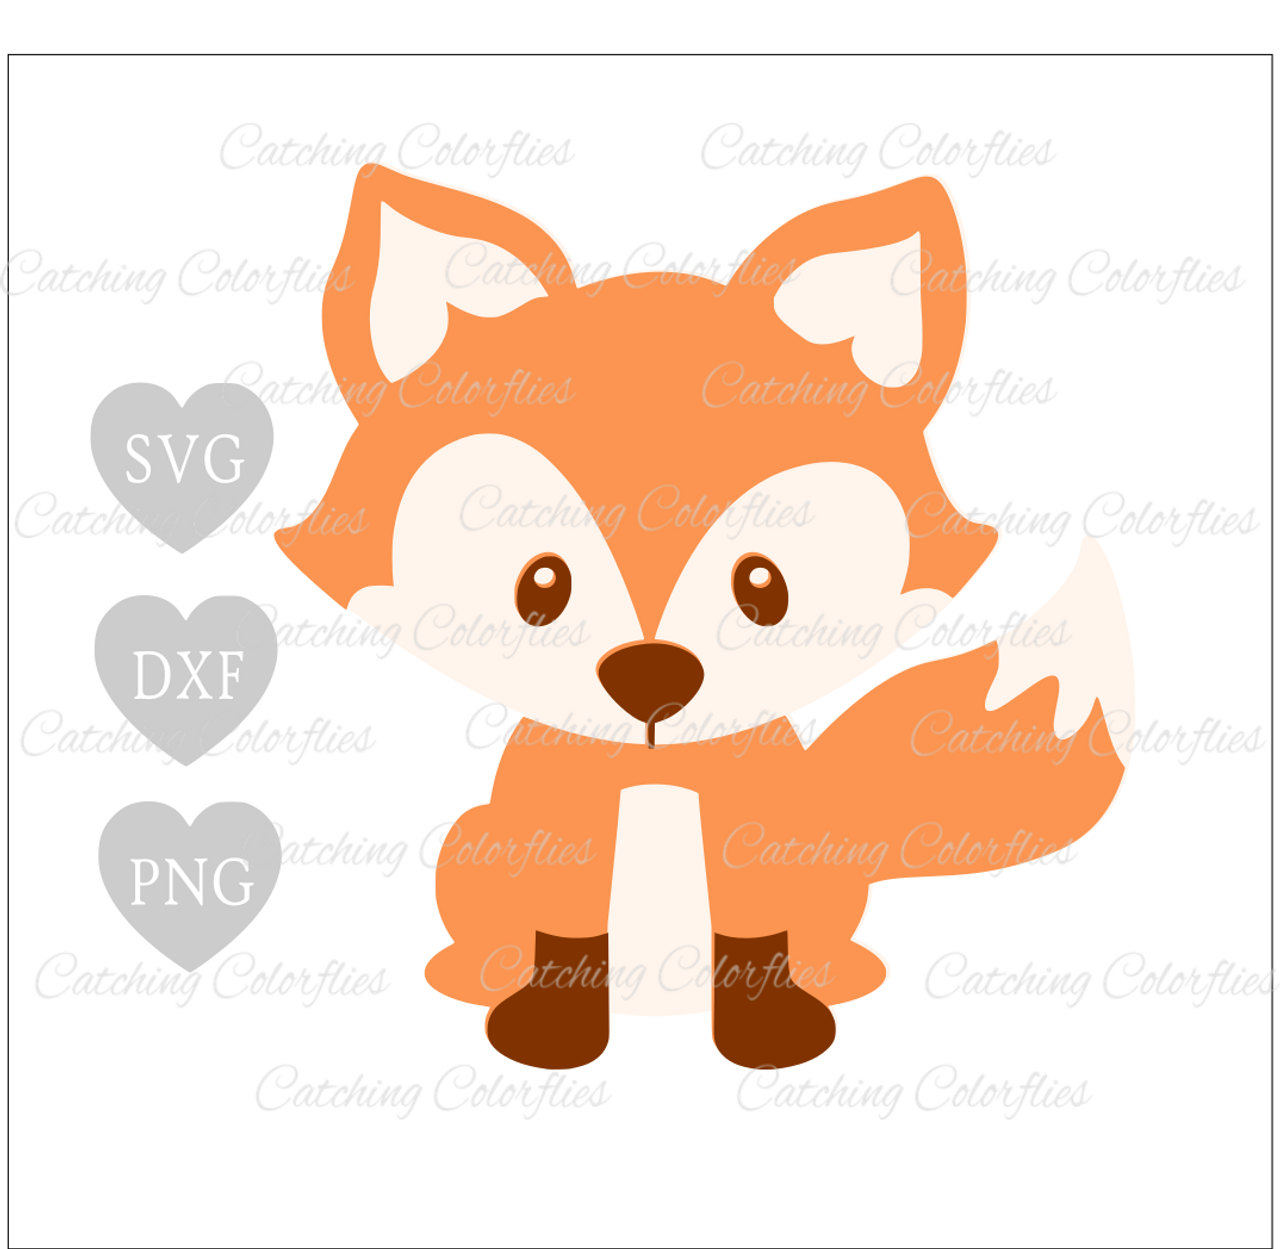 Download Cute Baby Fox SVG - Catching Colorflies